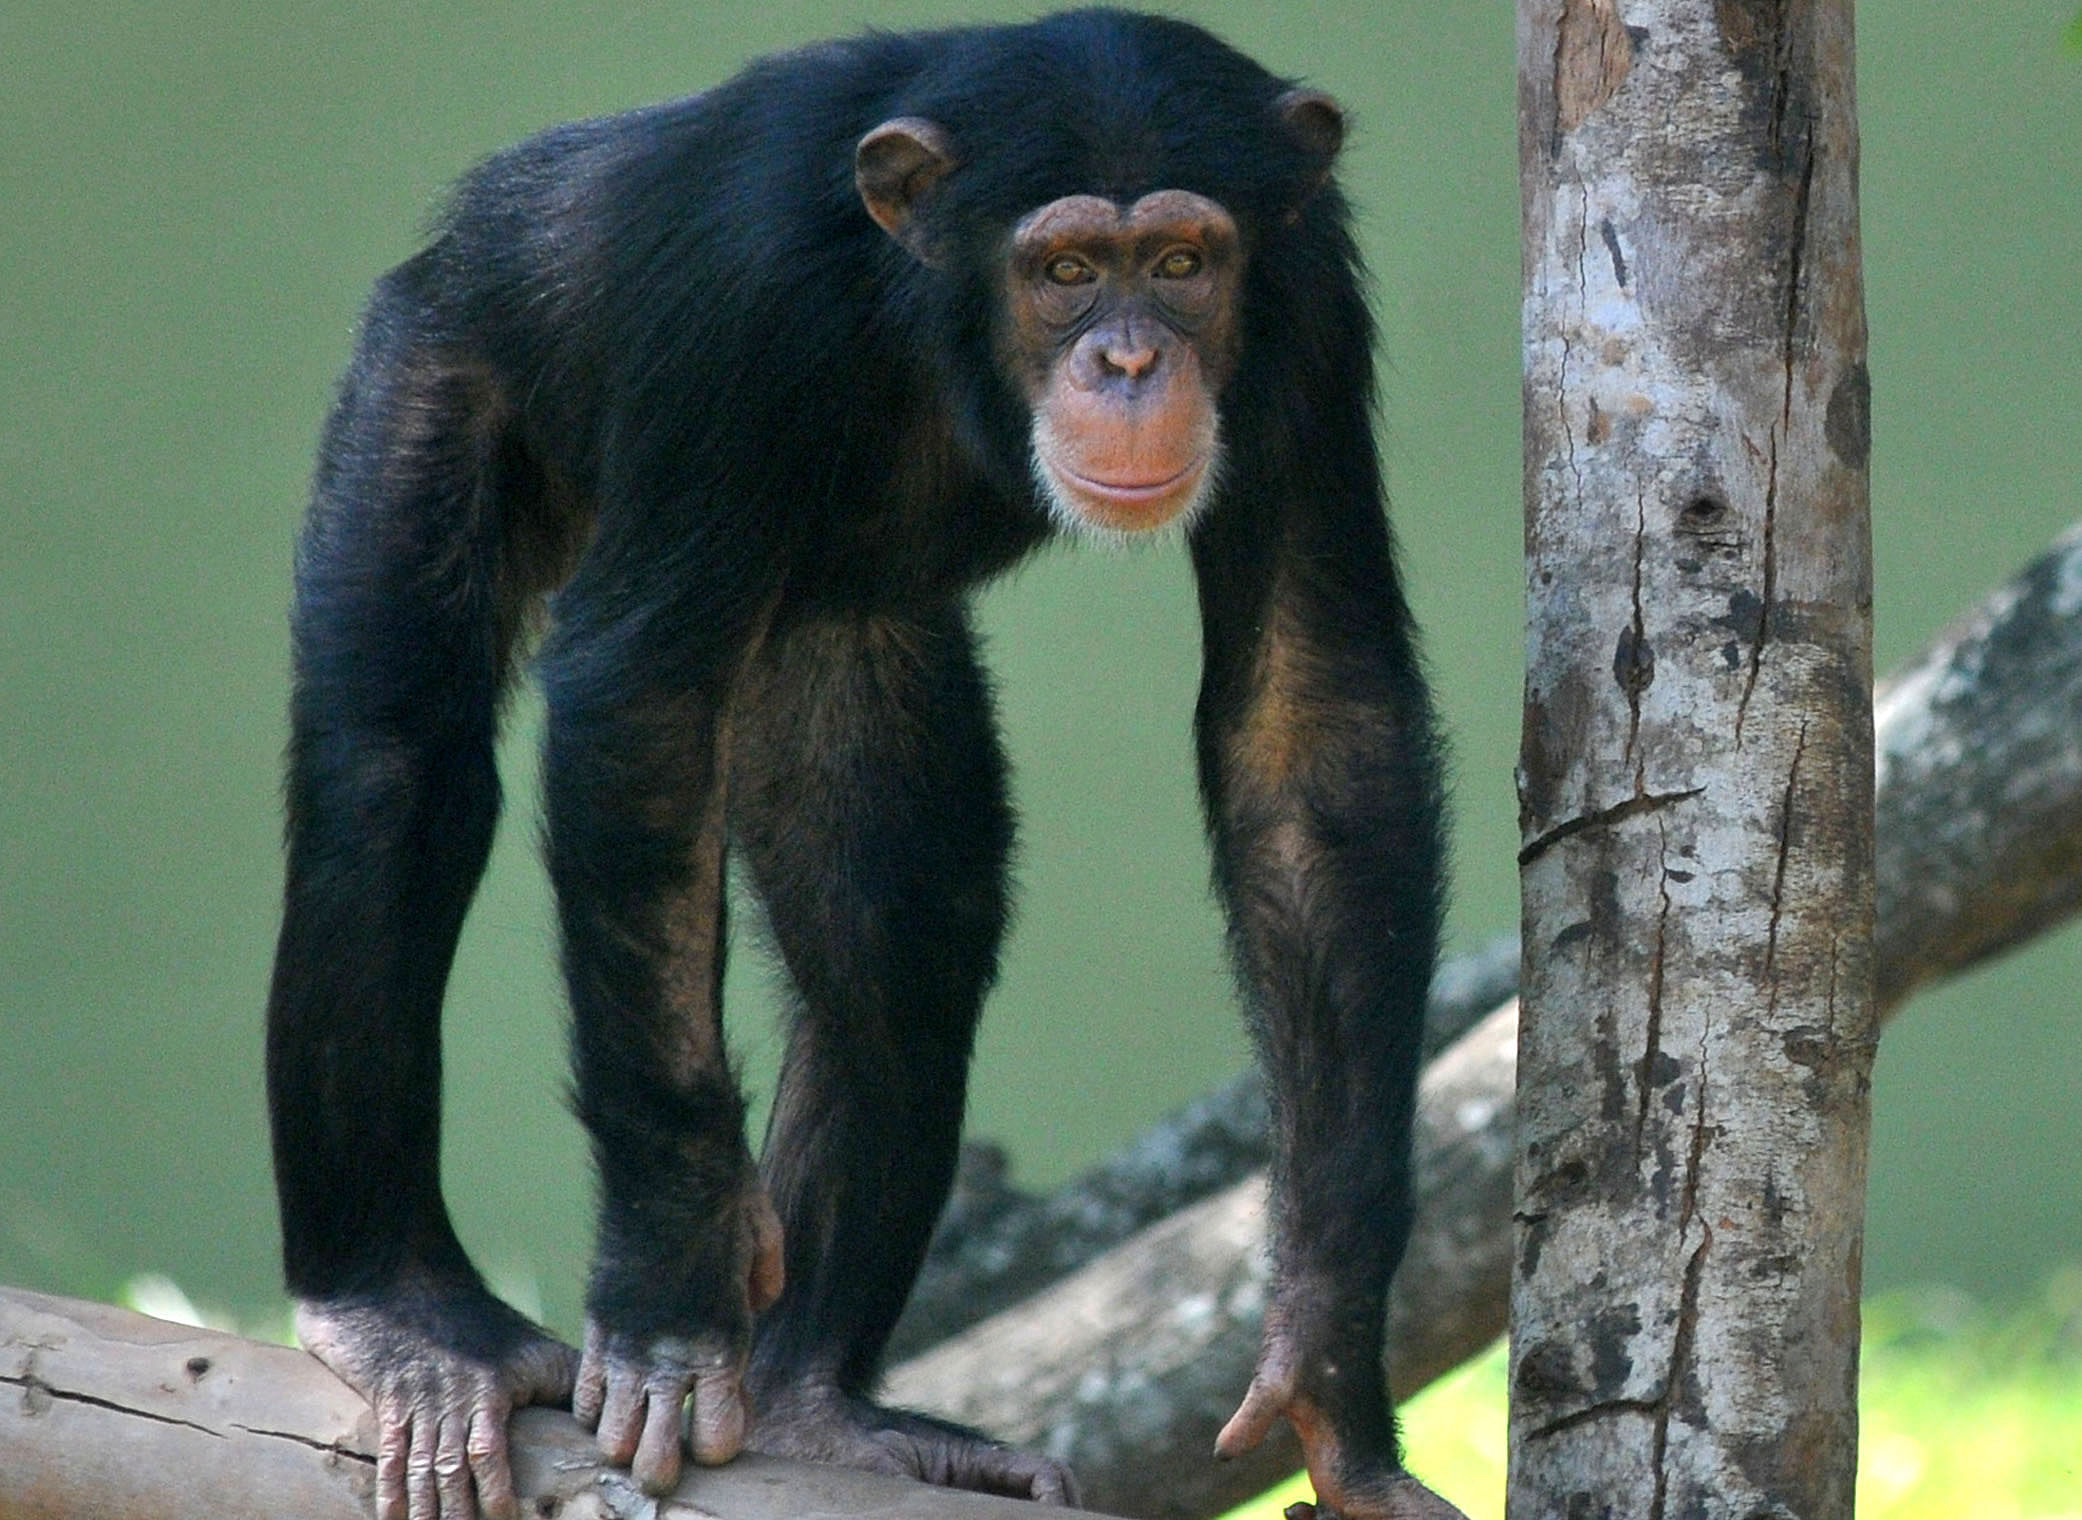 According to a new study that found chimps and bonobos can recall movie scenes and anticipate what takes place next. DH File Photo